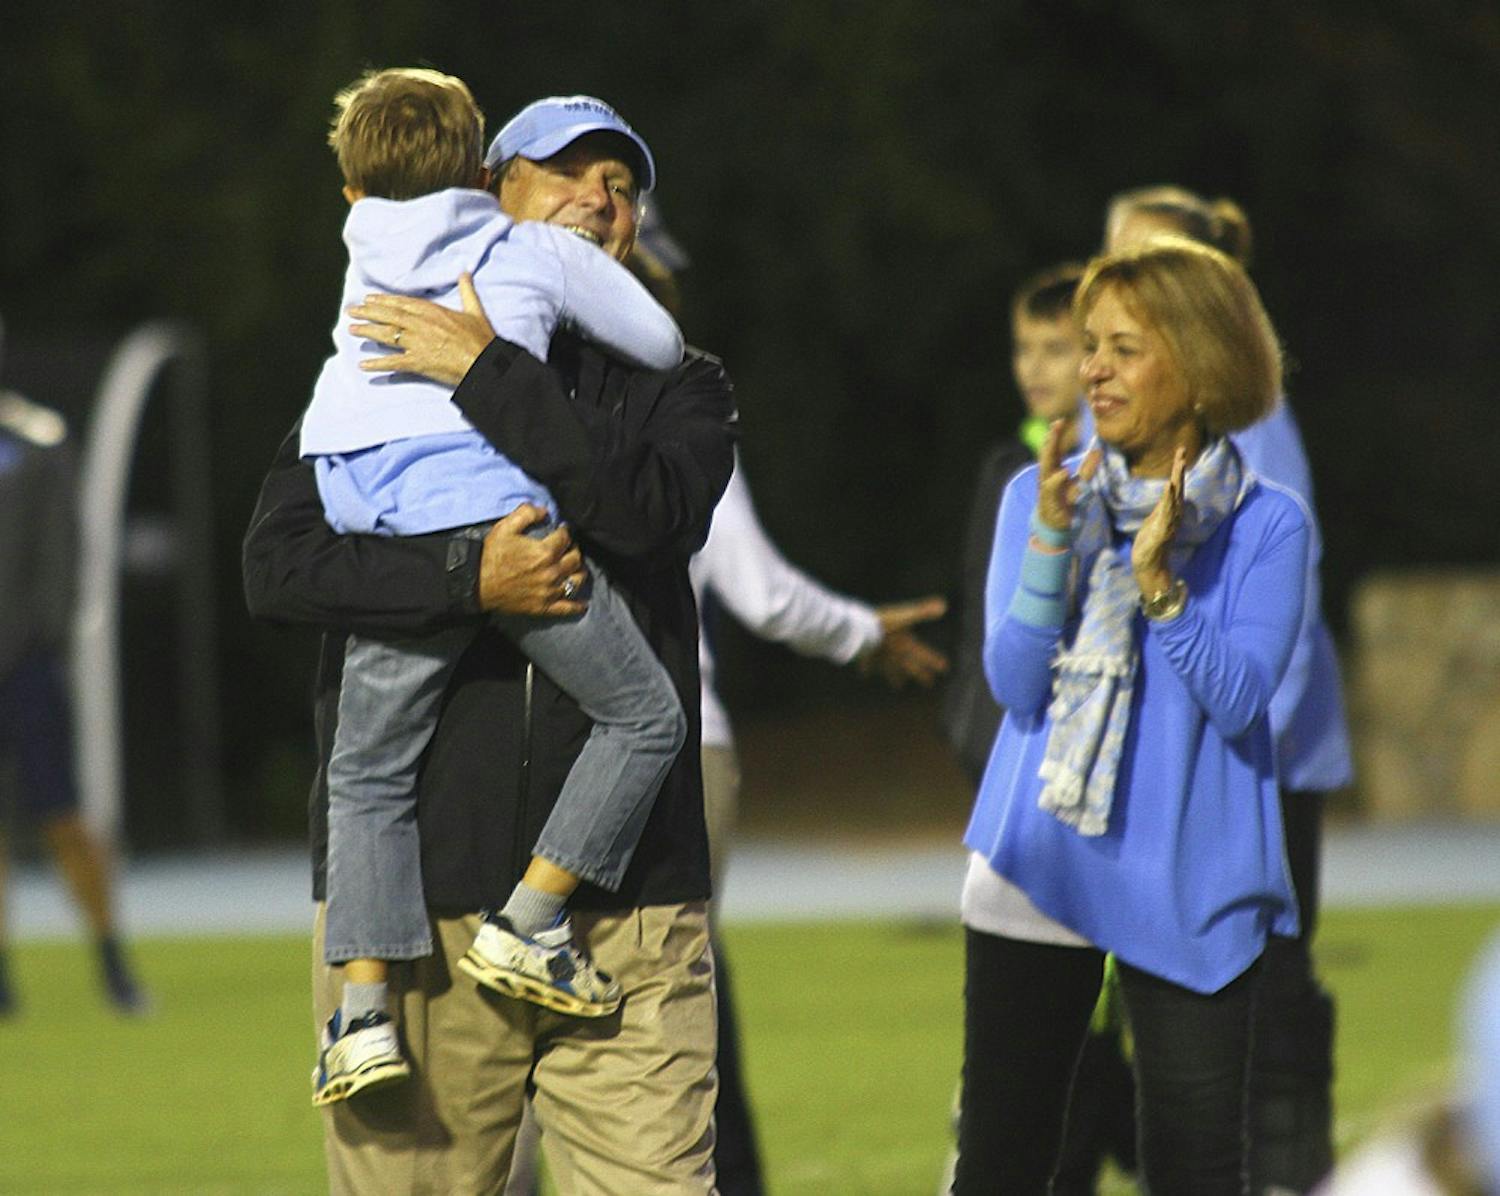 UNC Women's Soccer Head Coach Anson Dorrance with family after a historic 800th win as Head Coach.

http://www.goheels.com/SportSelect.dbml?SPSID=668177&SPID=12982